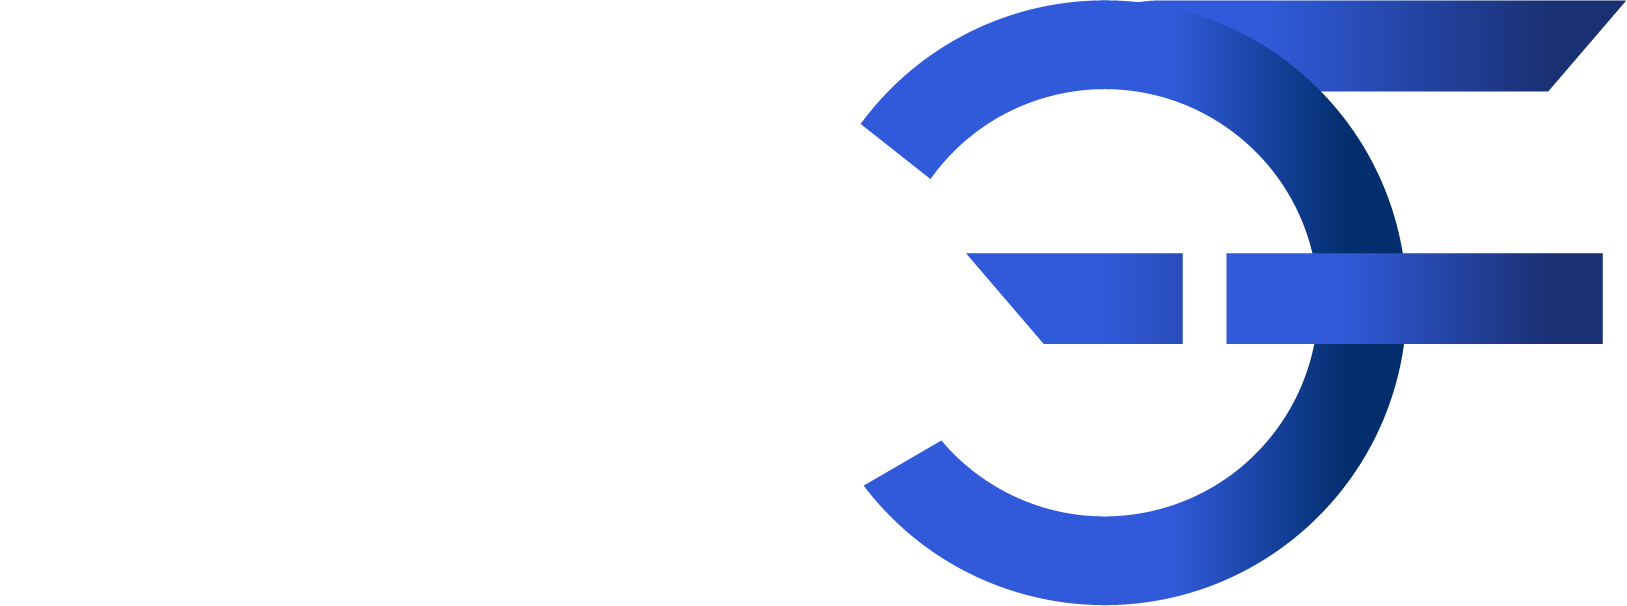 ofz-services-logo-weiss